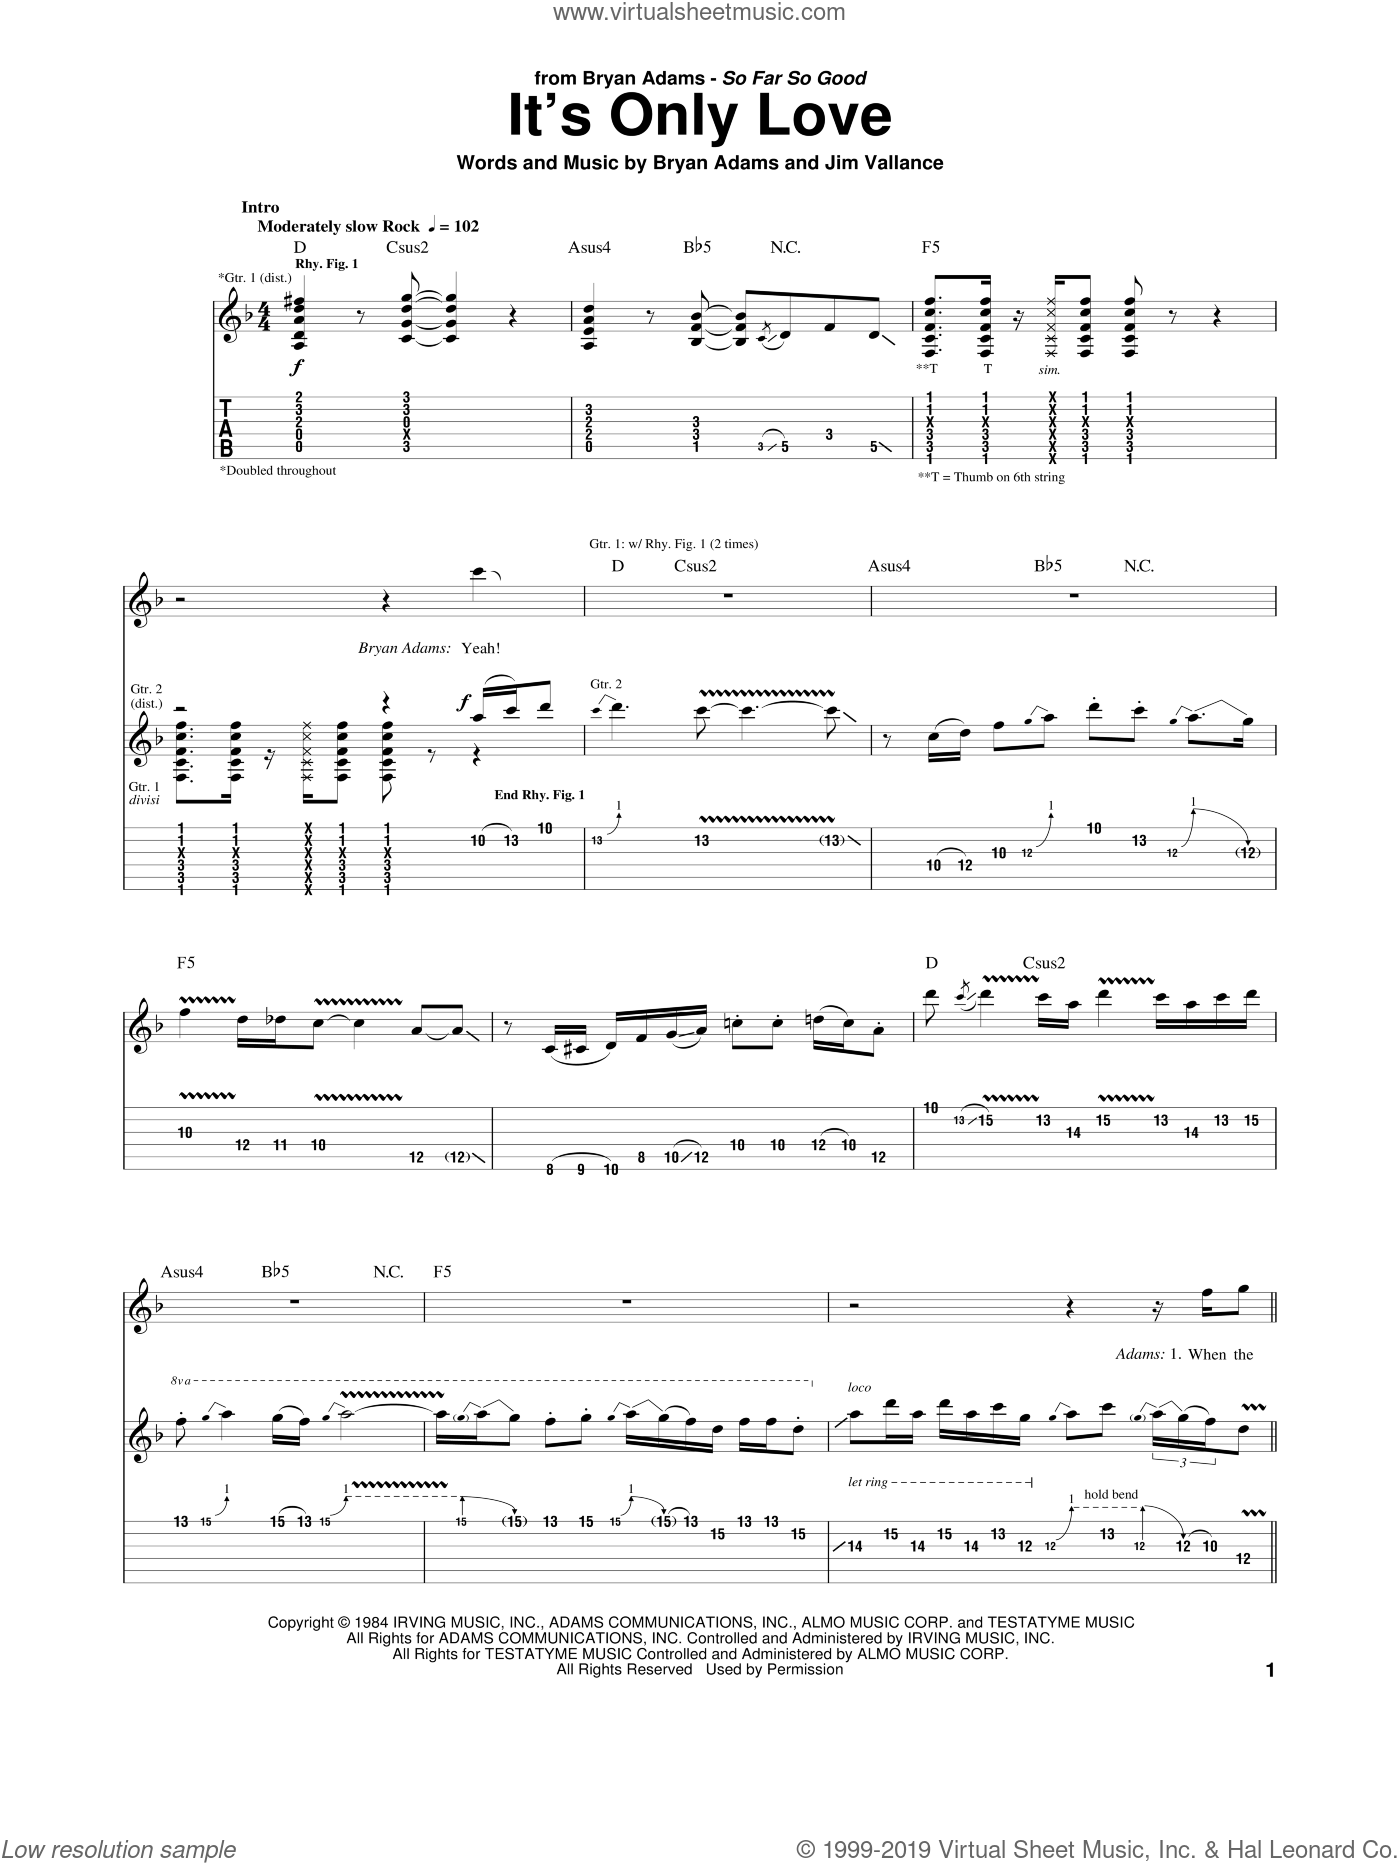 You Only Live Once by The Strokes Guitar Tab Digital Sheet Music